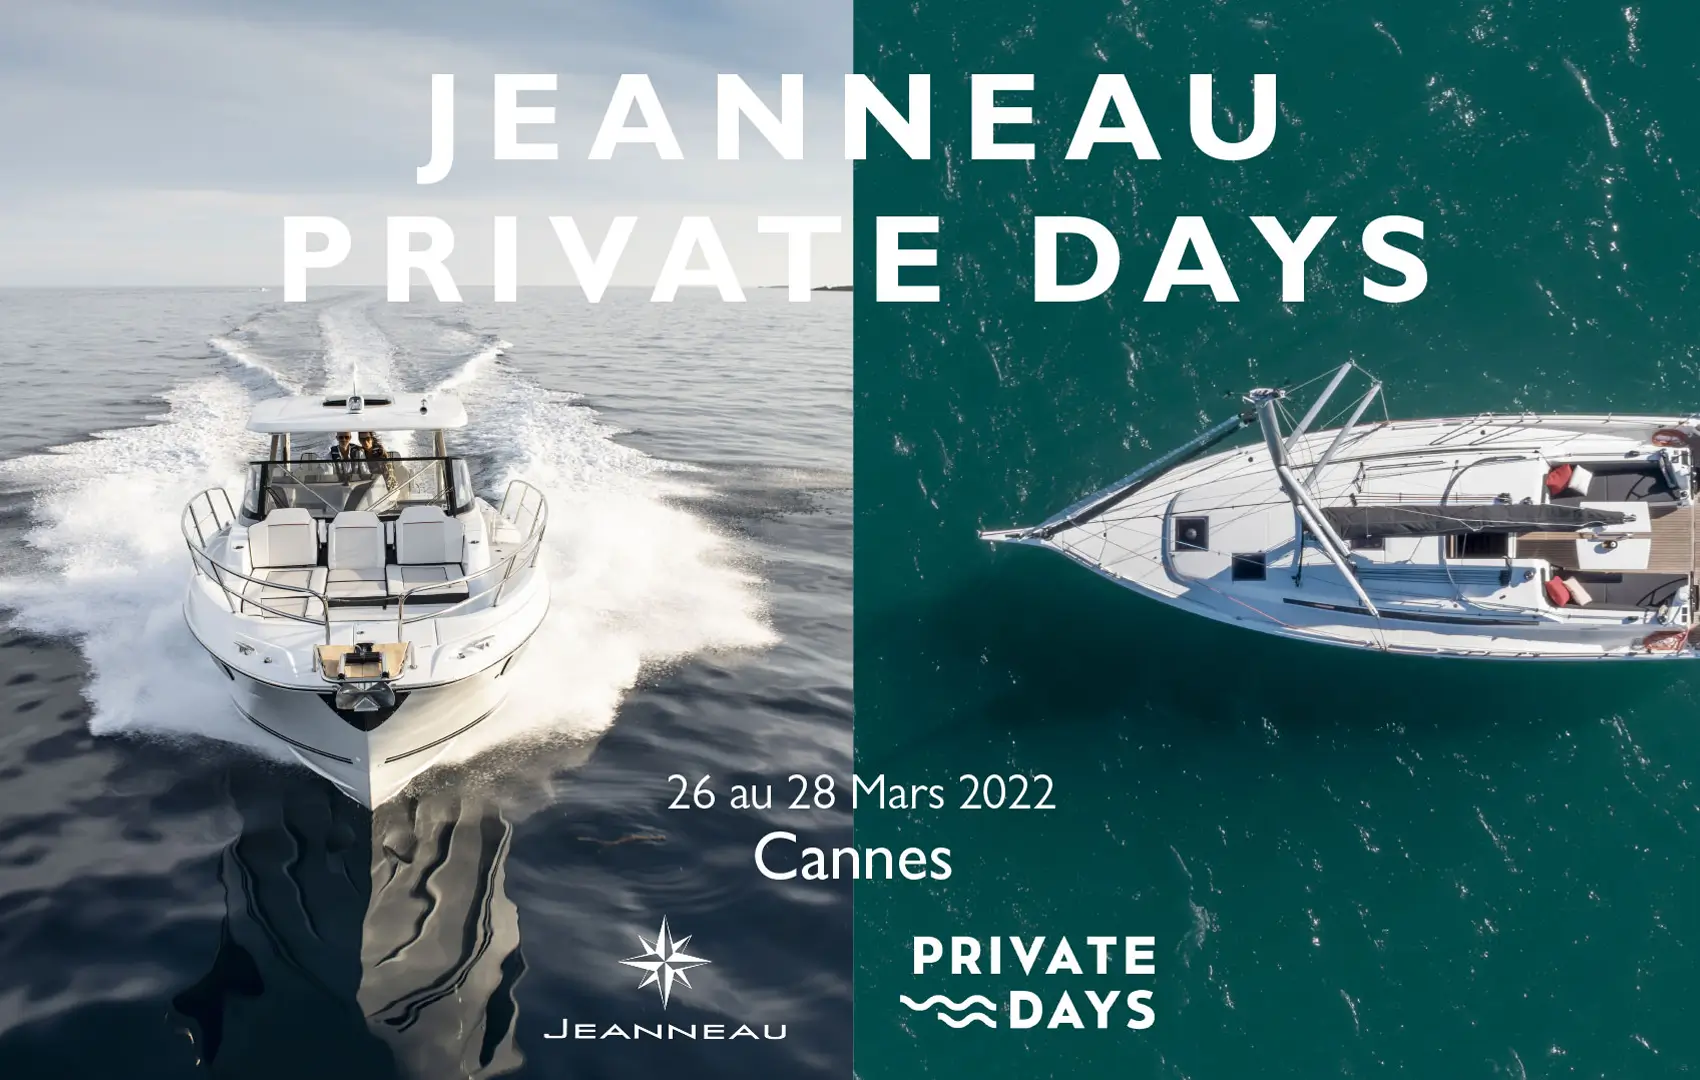 Jeanneau motorboot private days